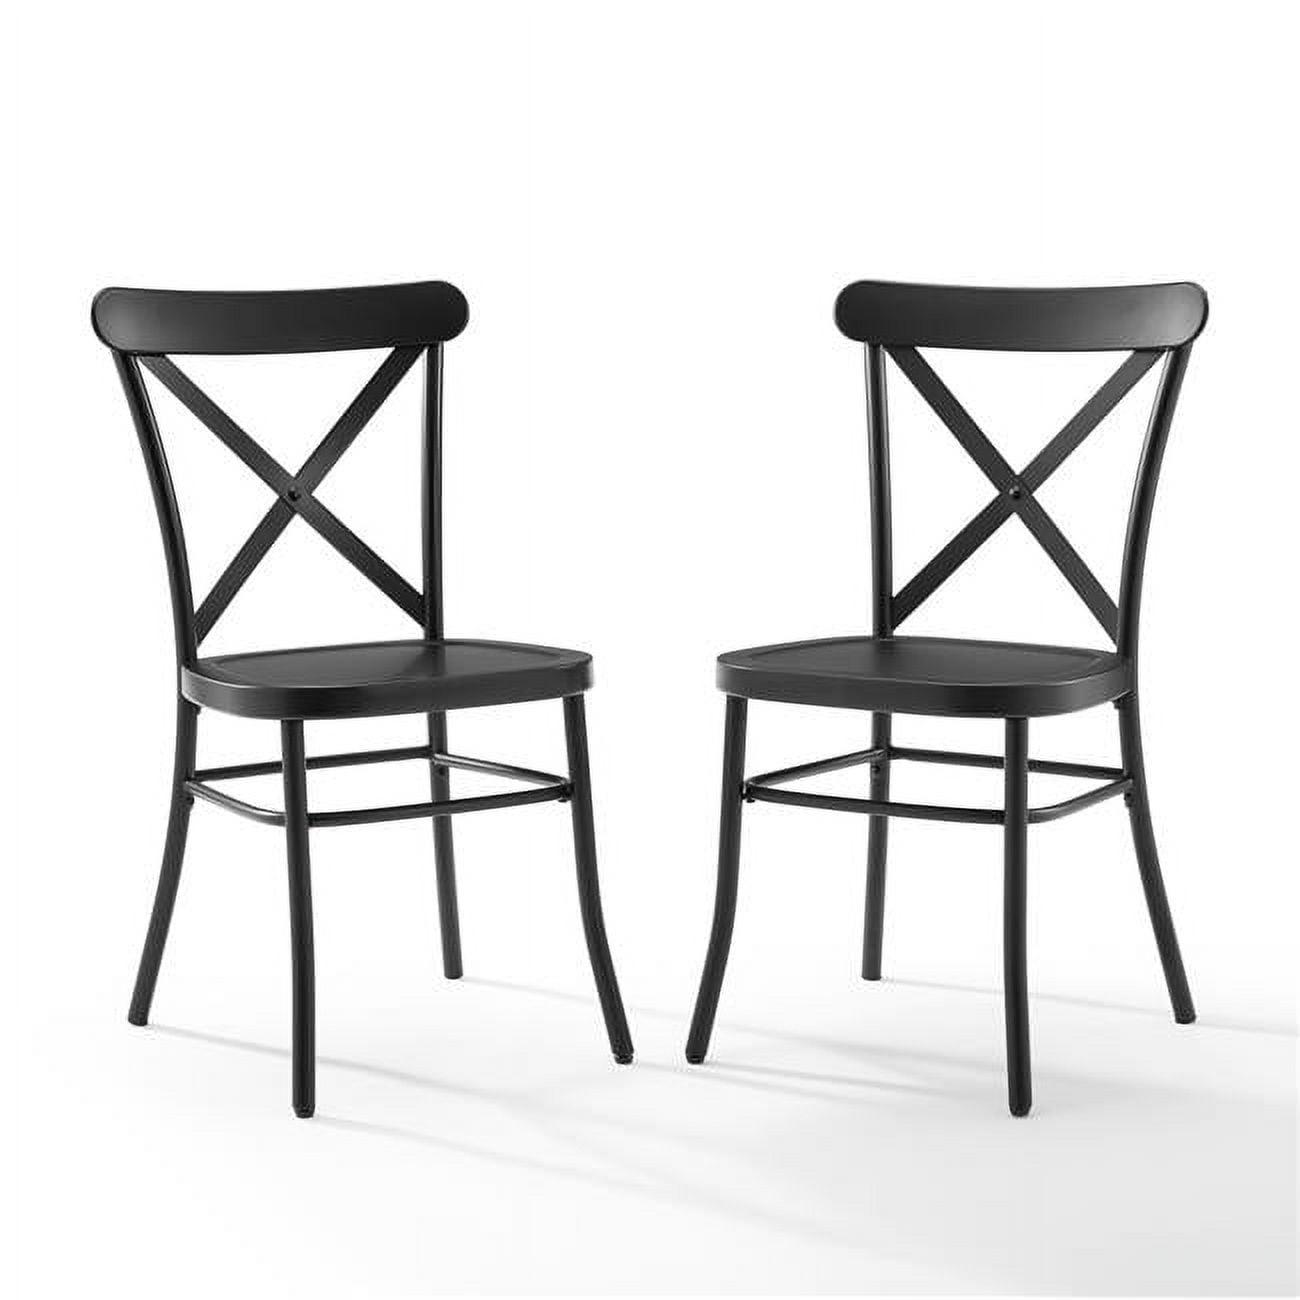 Set of 2 Matte Black Metal Cross Back Industrial Dining Chairs